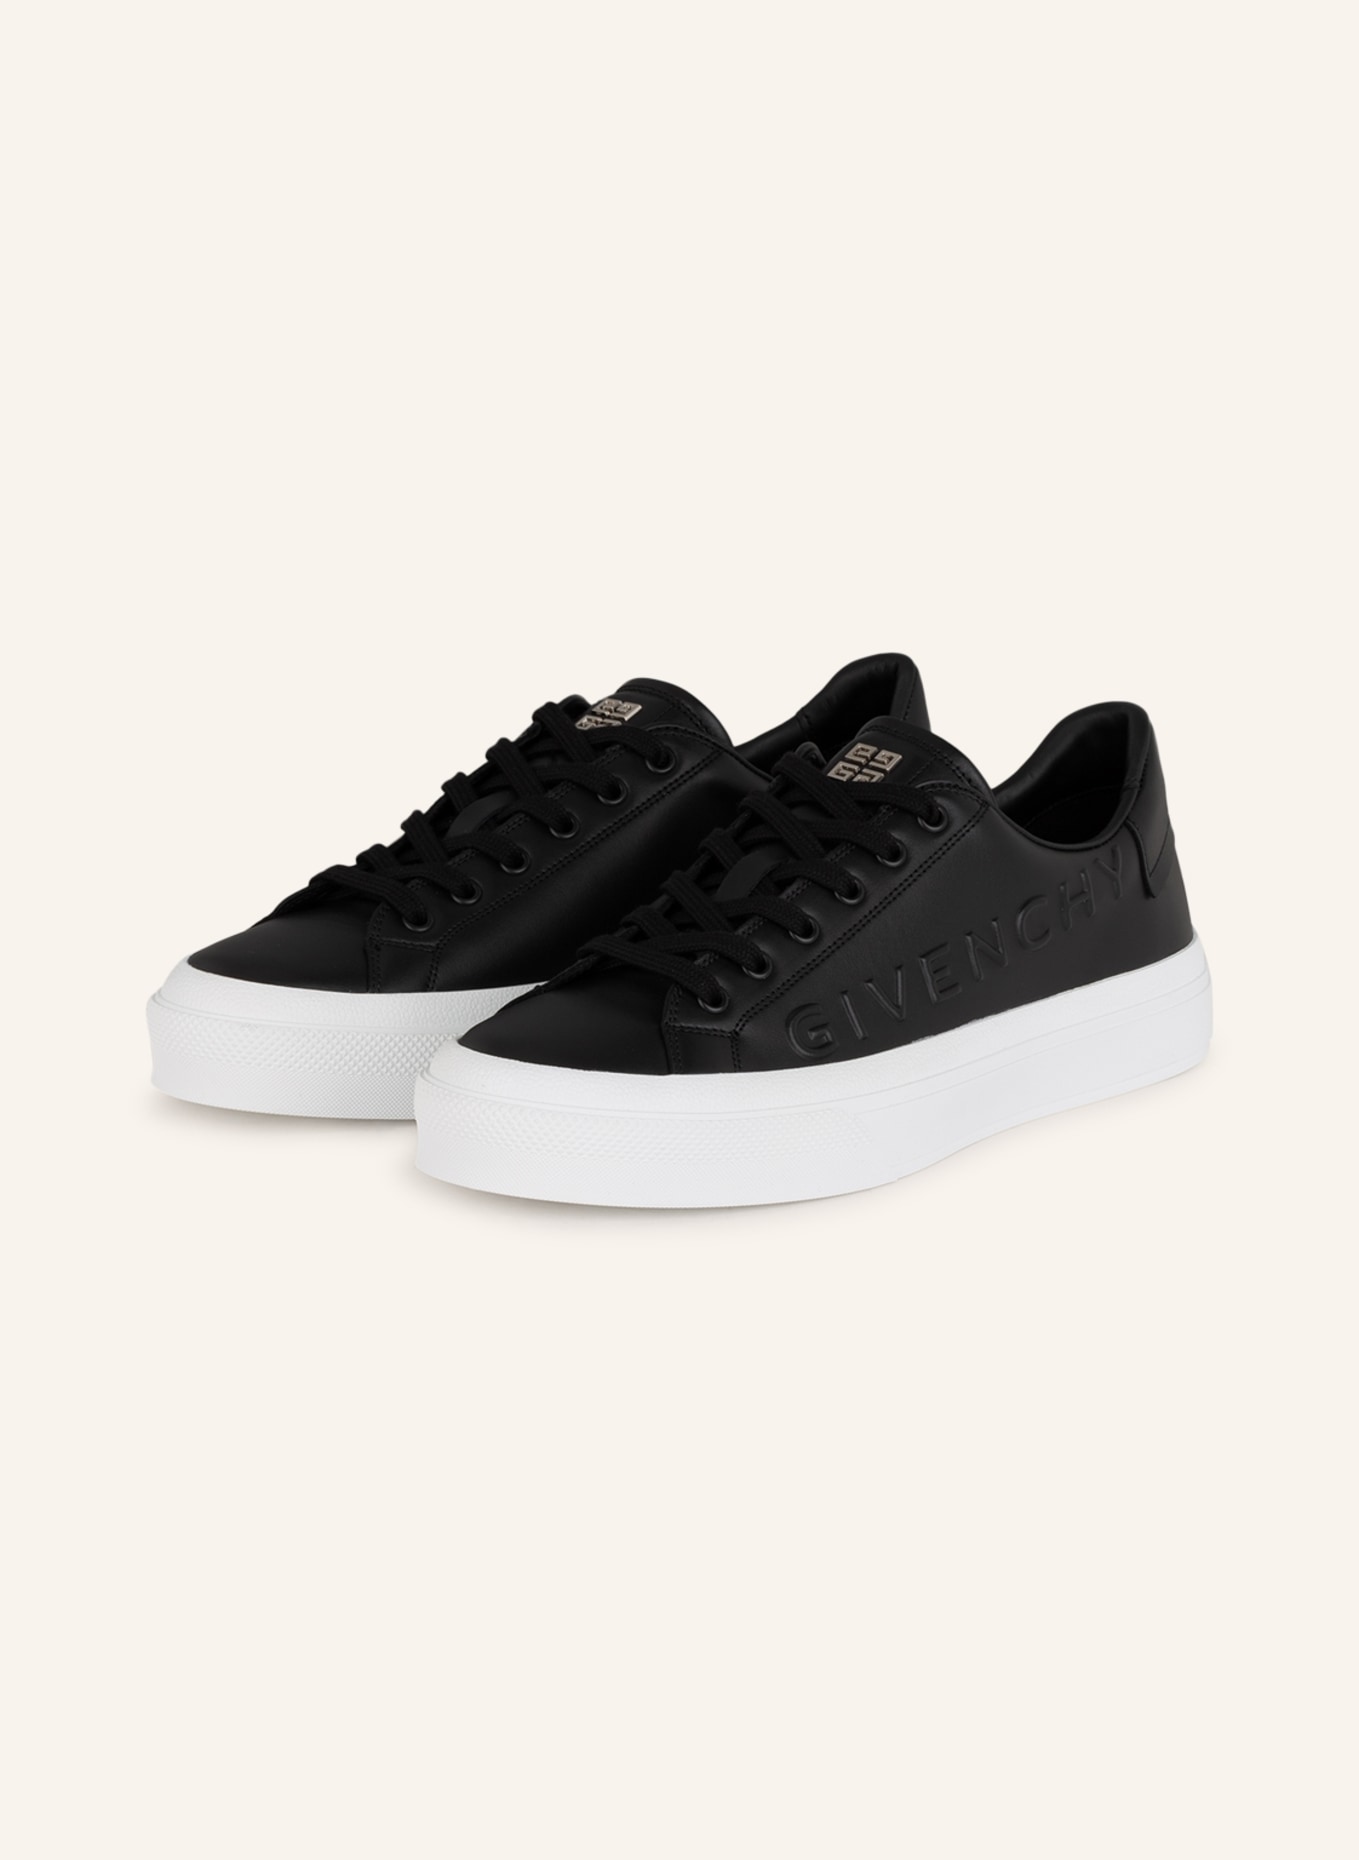 GIVENCHY Sneakers CITY SPORT in black